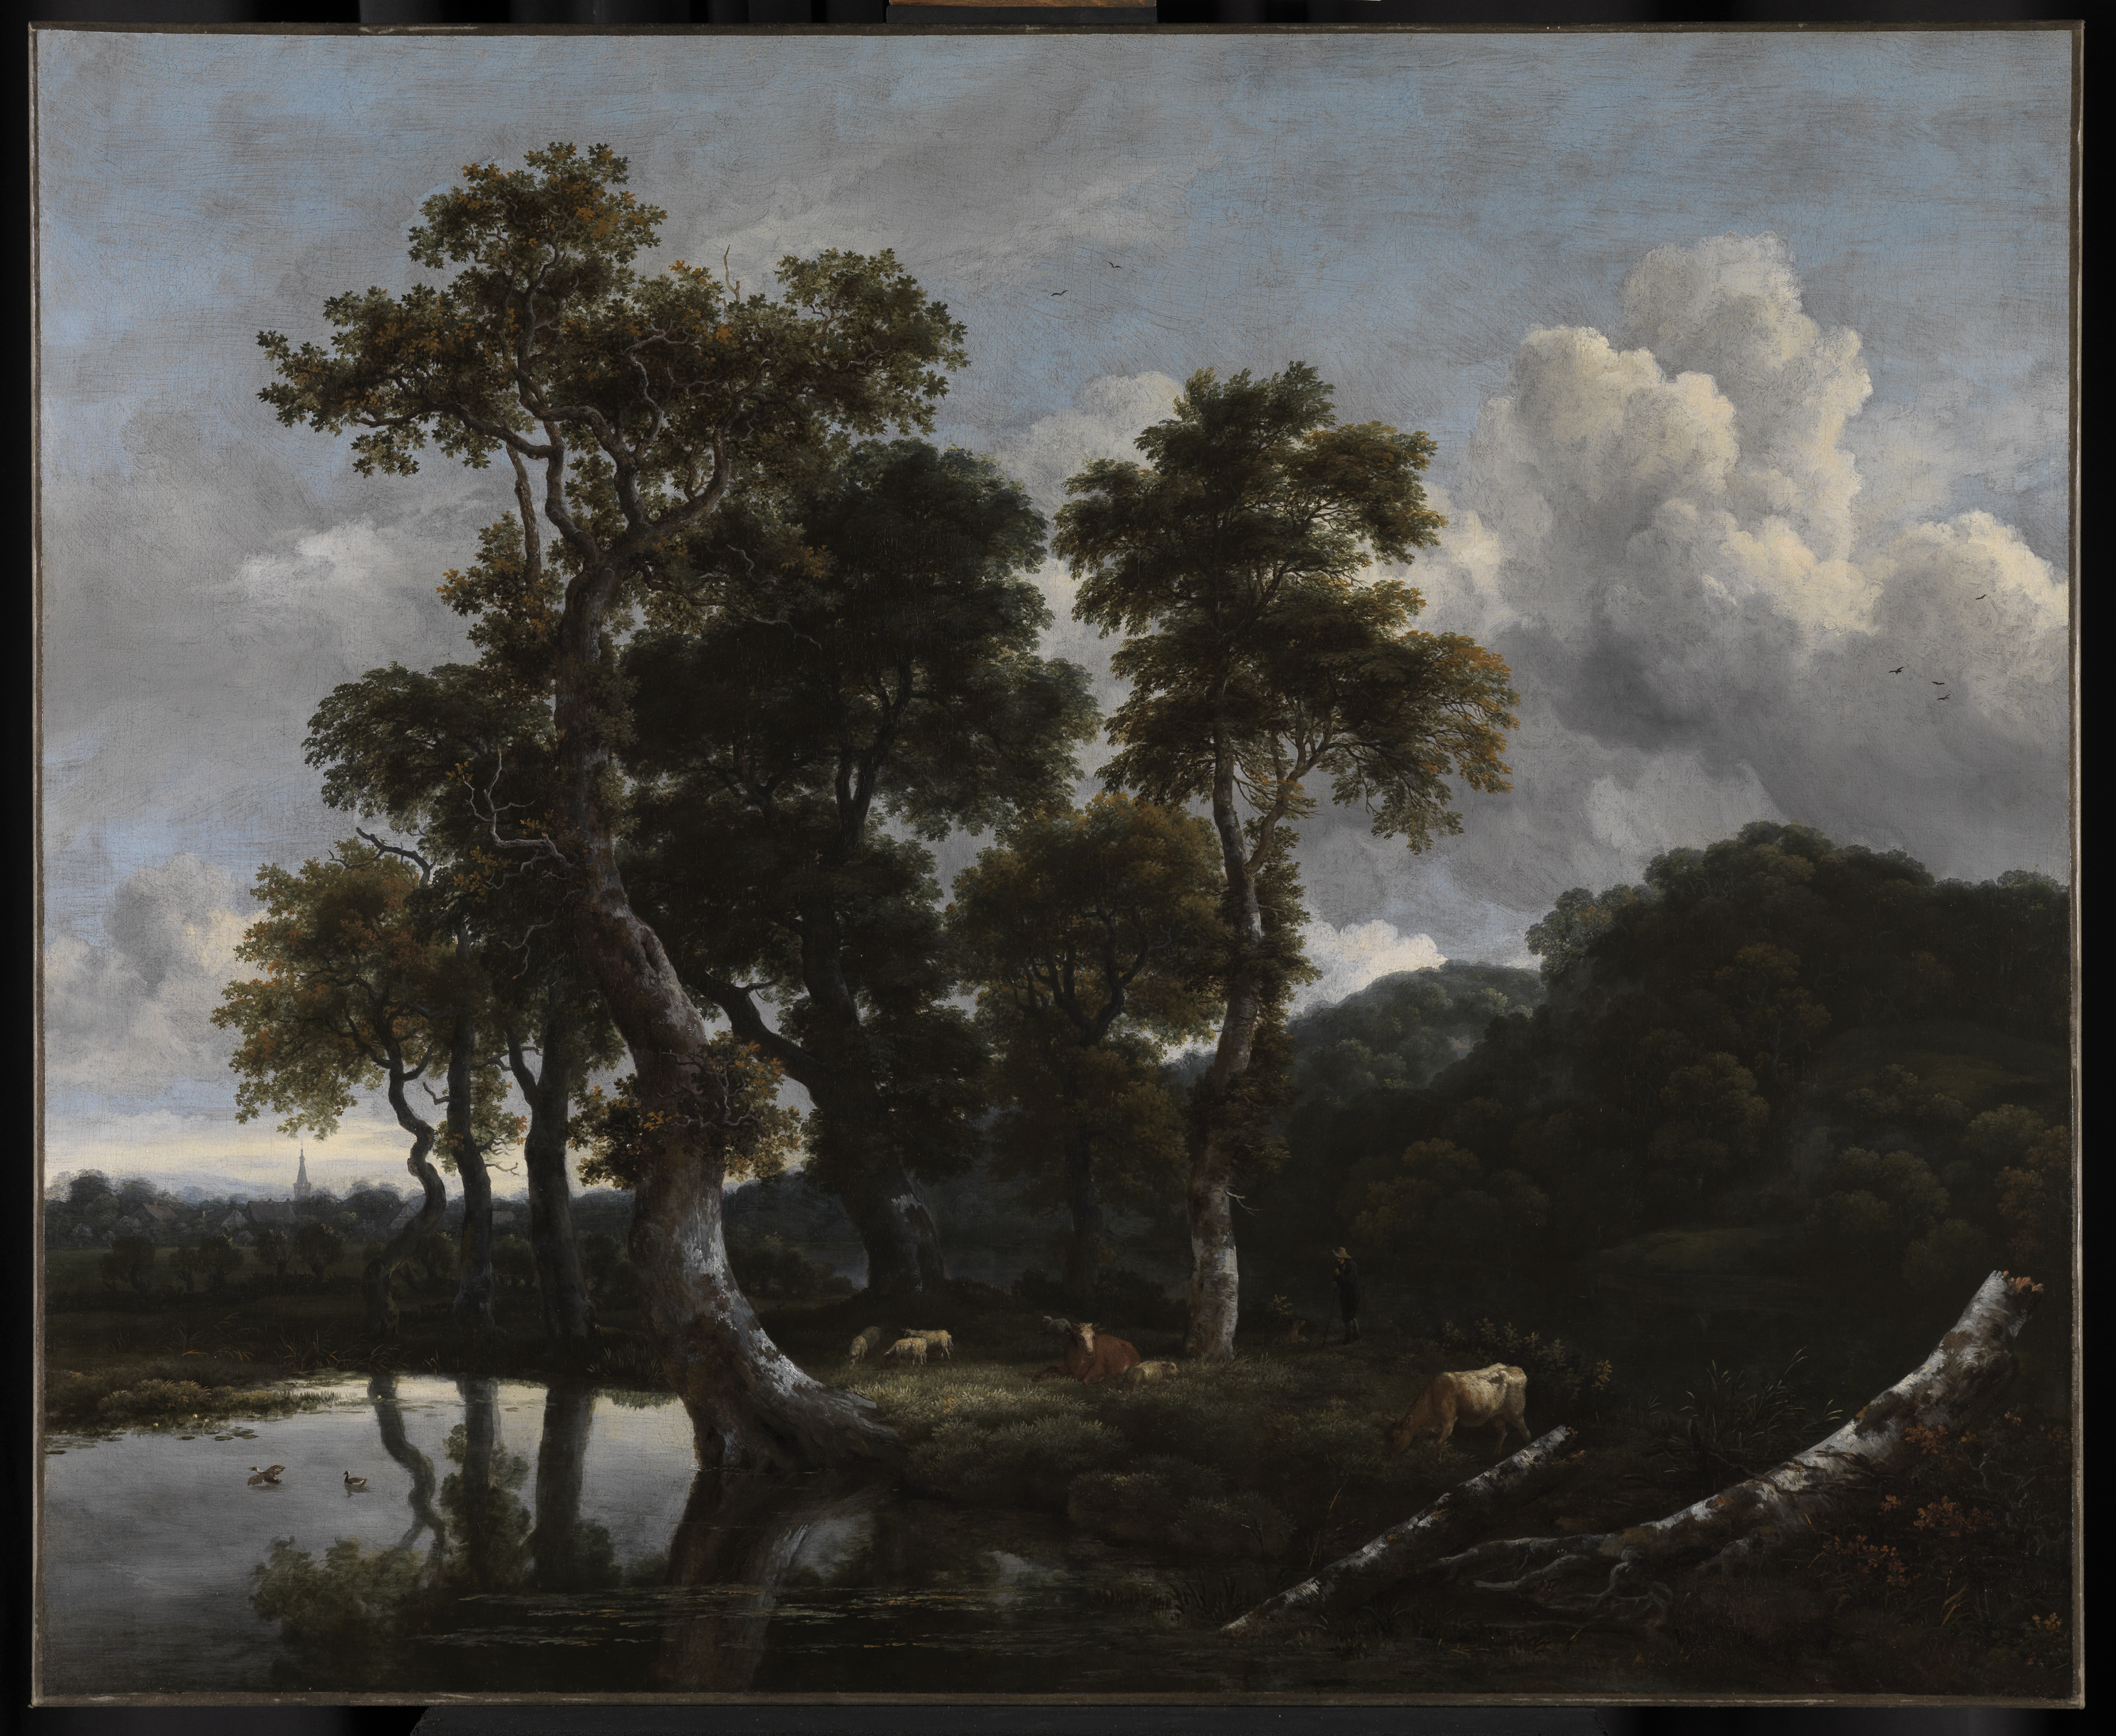 Grove of Large Oak Trees at the Edge of a Pond by Jacob van Ruisdael - 1665 - 101 x 123 cm Staatliche Kunsthalle Karlsruhe